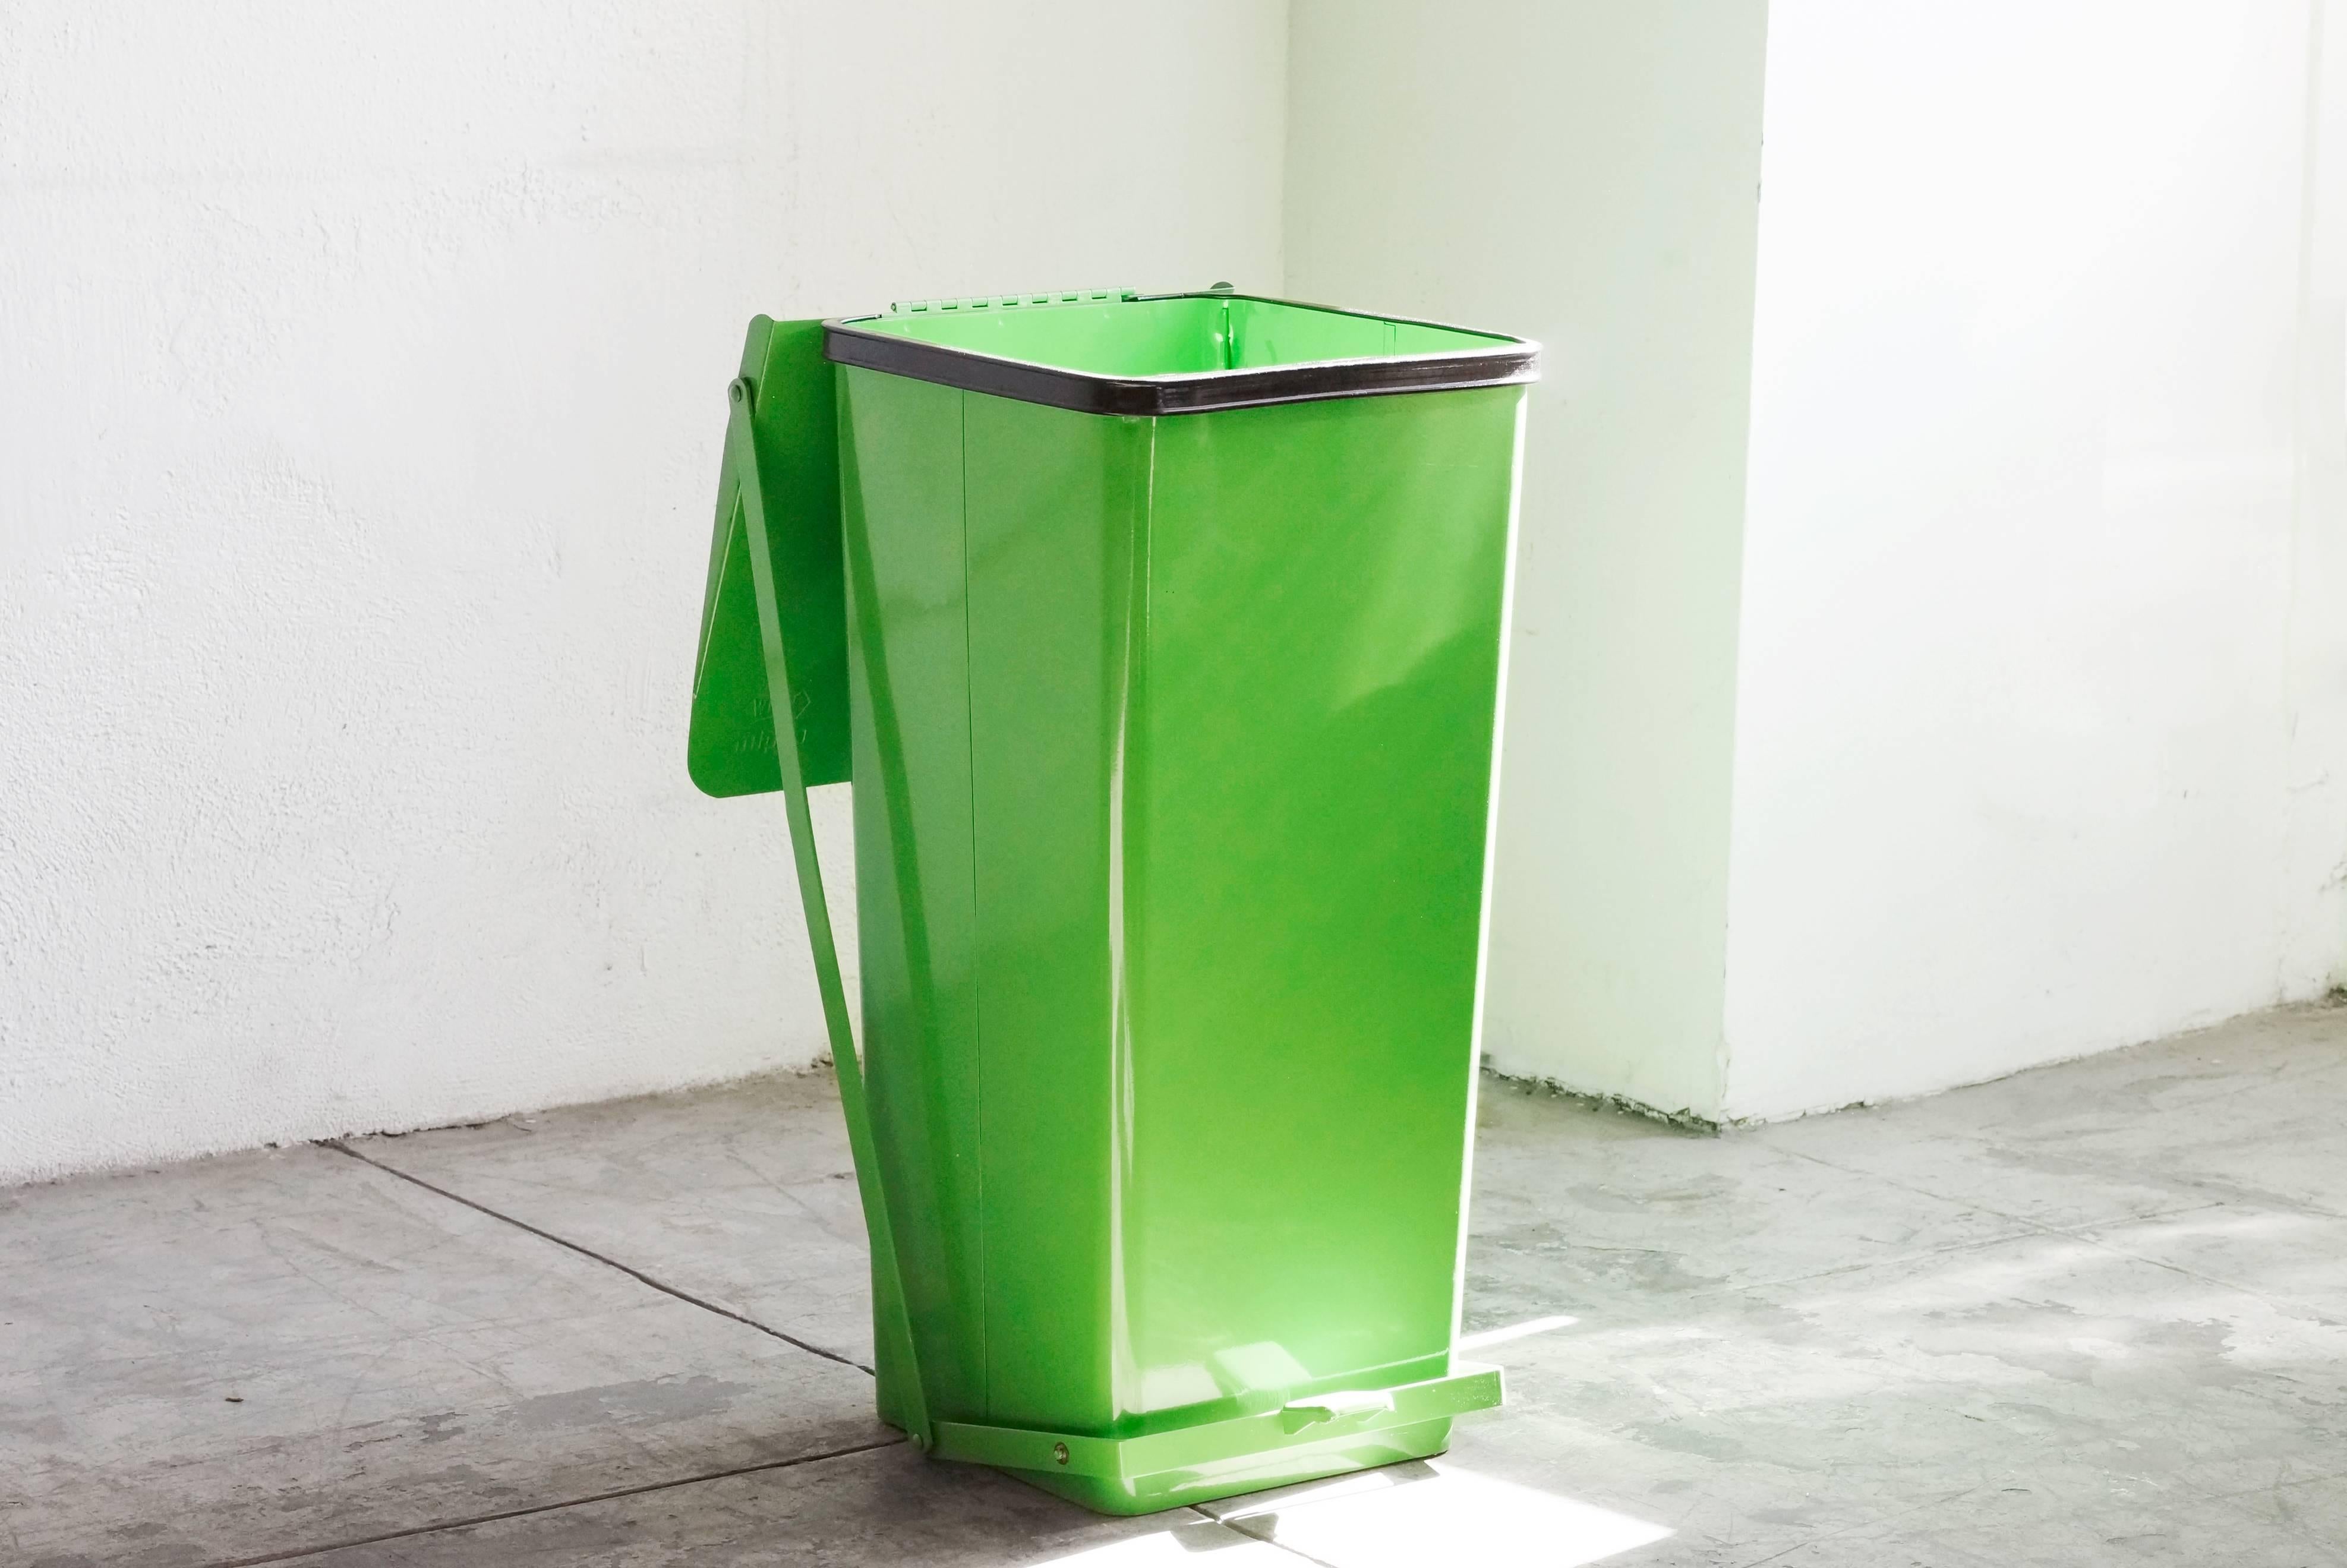 Vintage storage bin with push pedal, refinished in lime green. This tall, heavy duty storage piece by White Mipro was originally conceived as a hospital hamper. Also suitable as trash can.

Dimensions: 15